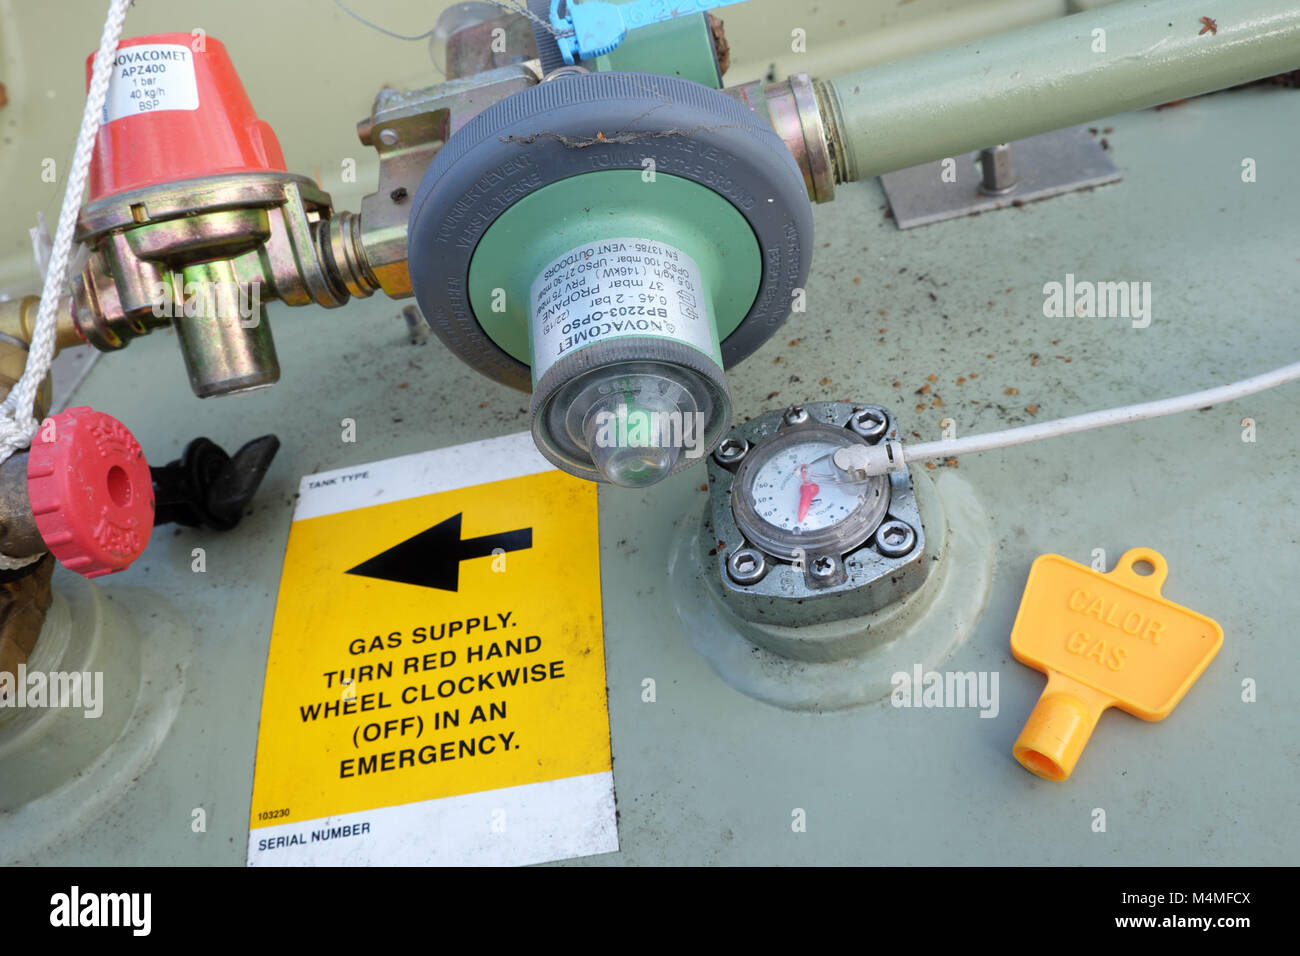 Calor LPG gas tank meter and valves Stock Photo